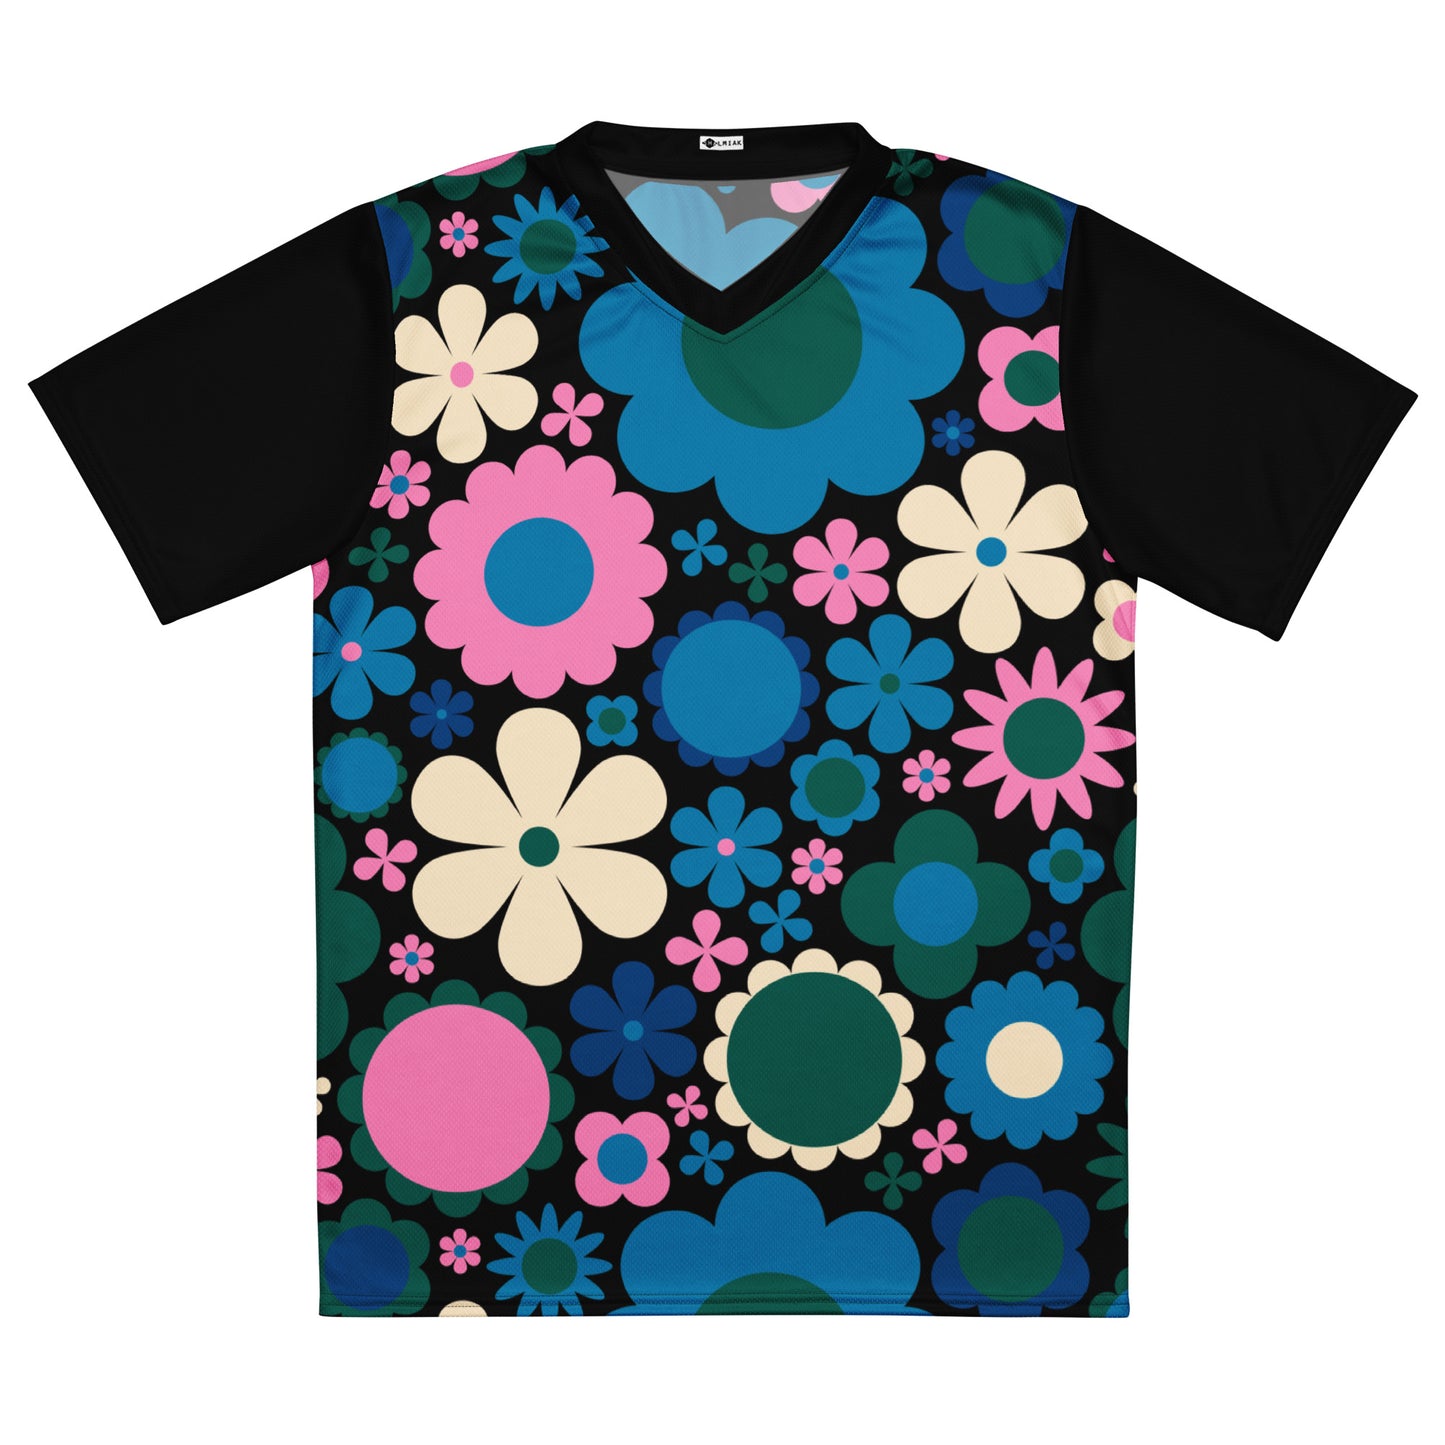 BLOOMPOP blue pink - Recycled unisex sports jersey